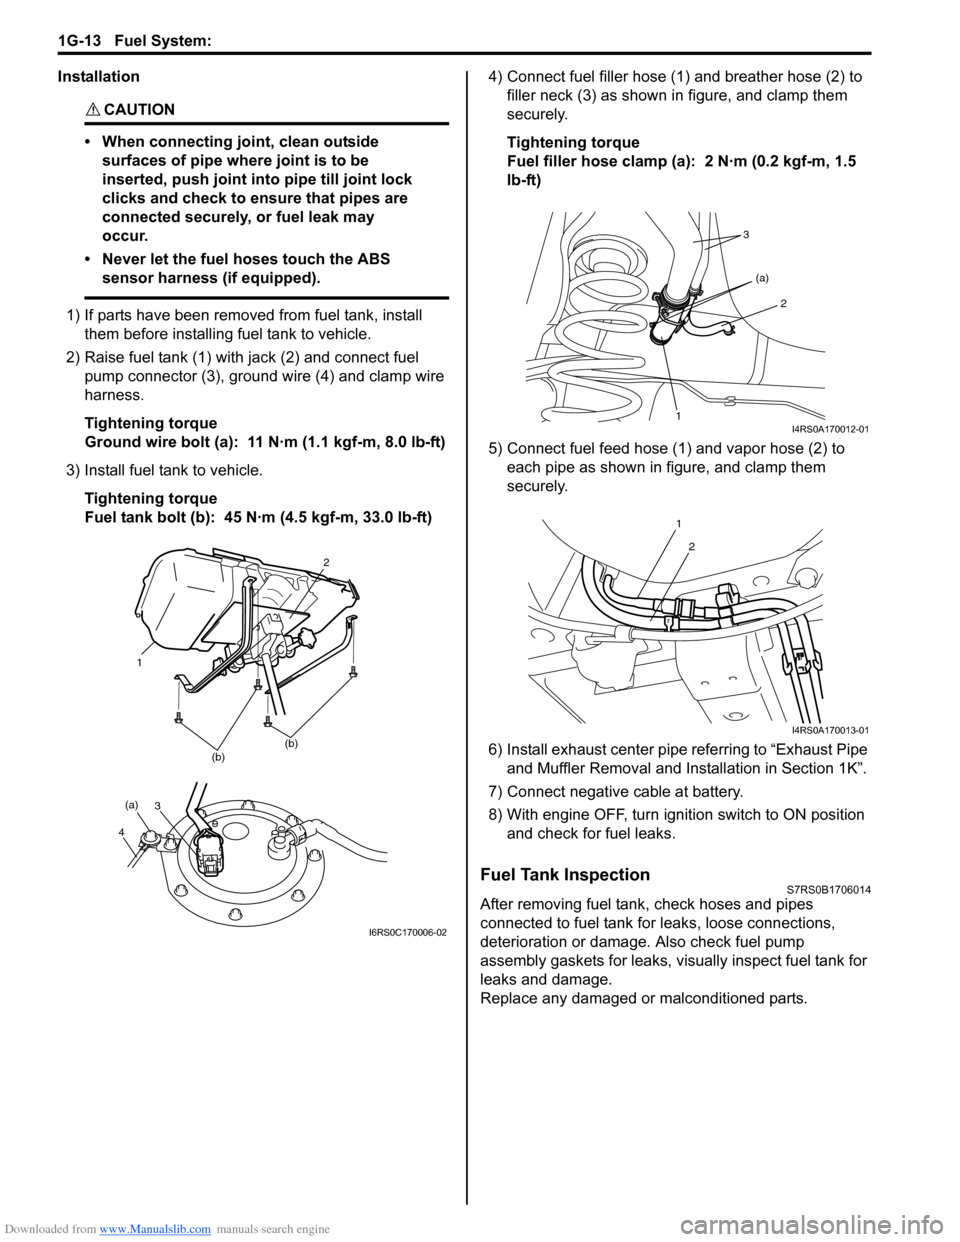 SUZUKI SWIFT 2004 2.G Service Workshop Manual Downloaded from www.Manualslib.com manuals search engine 1G-13 Fuel System: 
Installation
CAUTION! 
• When connecting joint, clean outside surfaces of pipe where joint is to be 
inserted, push joint